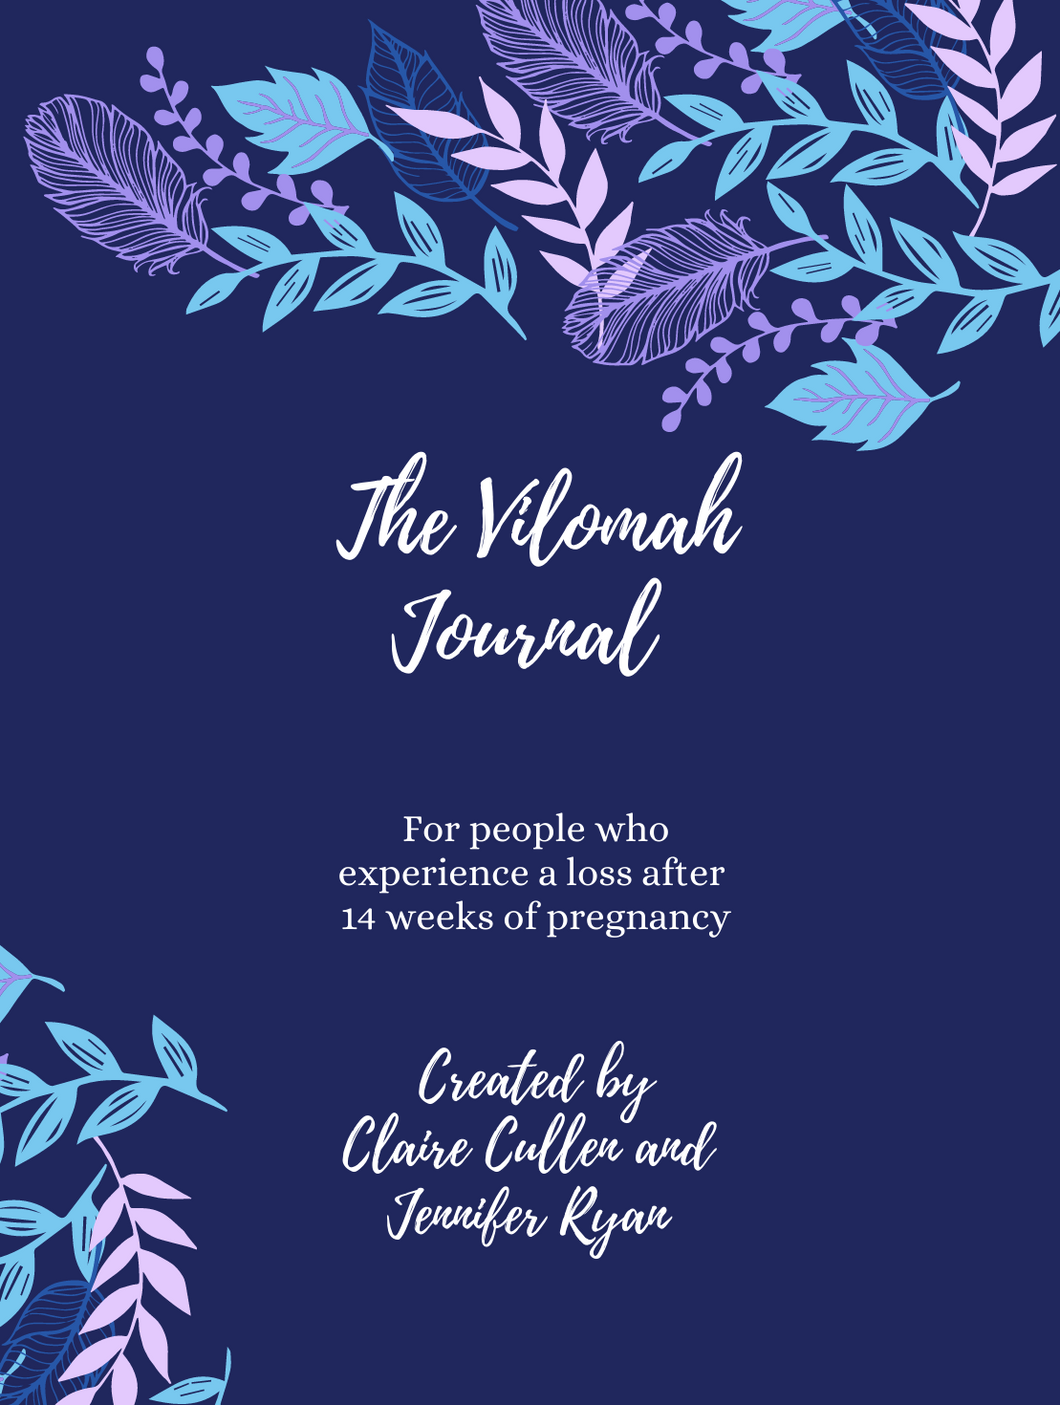 The Vilomah Pregnancy Loss Digital Download Journal: For people experiencing a loss in pregnancy after 14 weeks